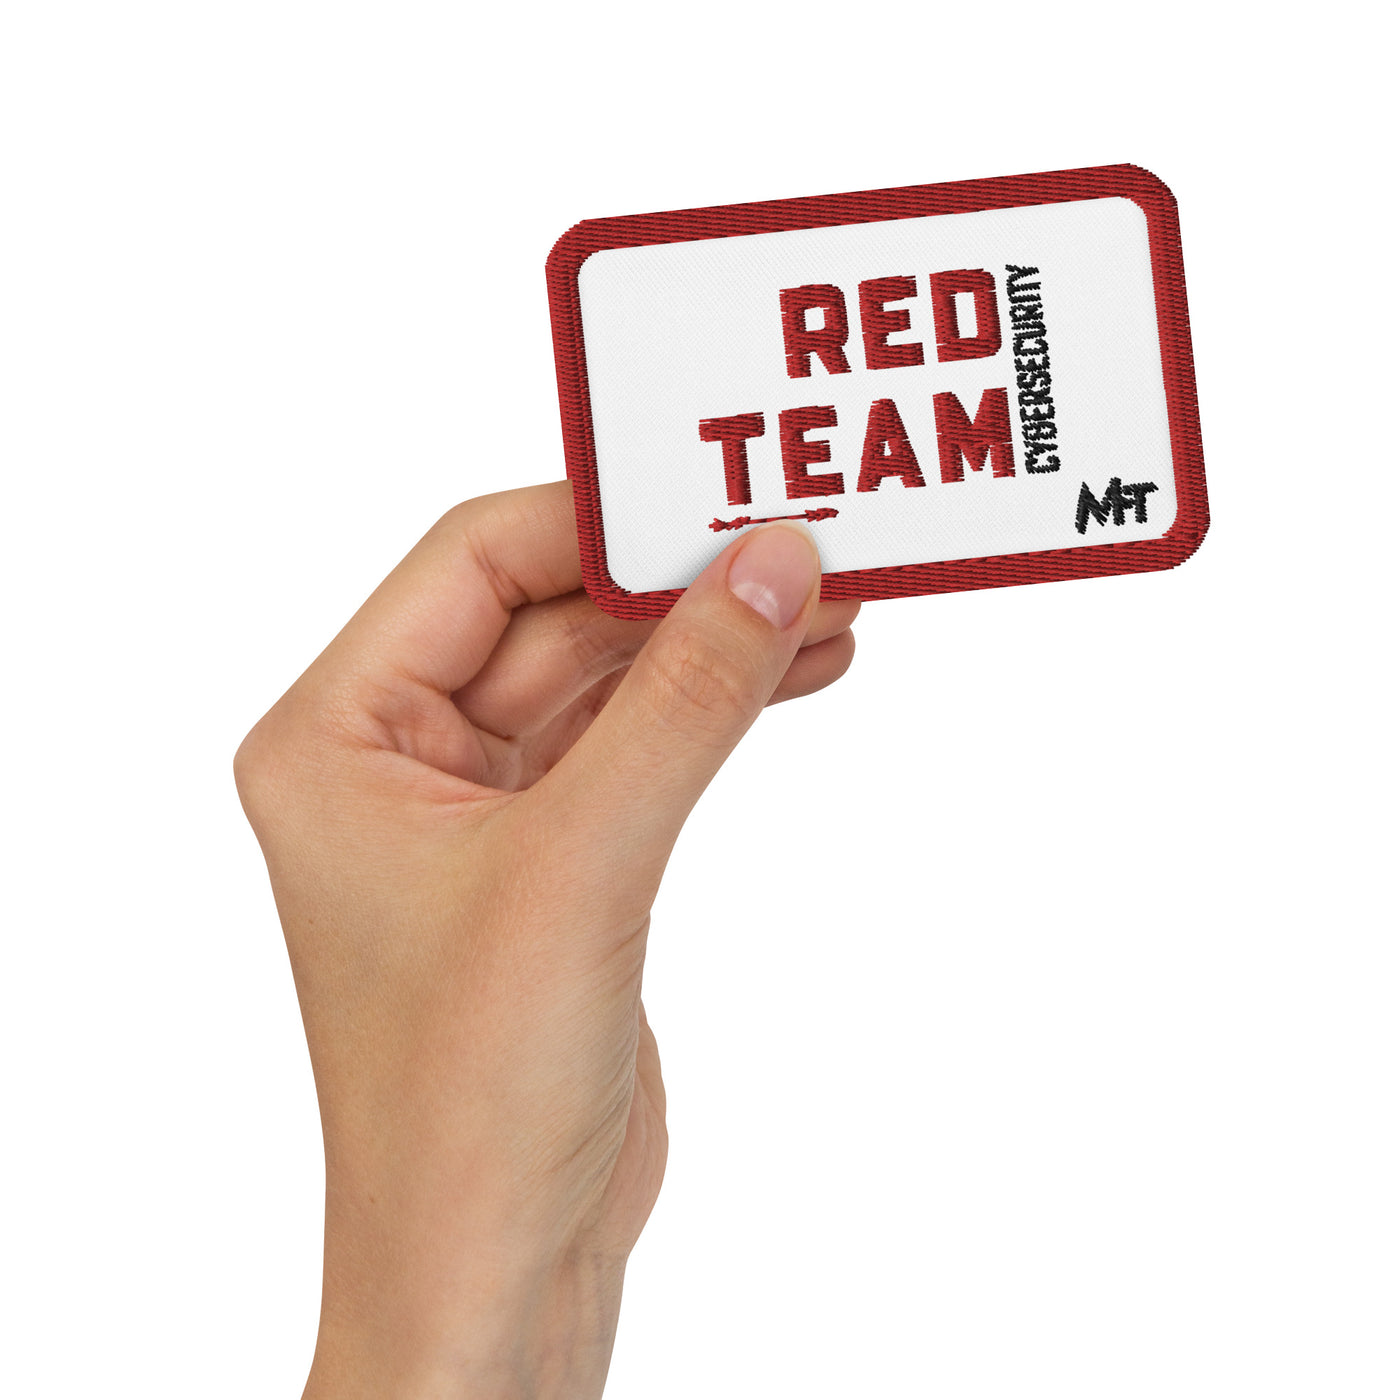 Cyber Security Red Team V7 - Embroidered patches